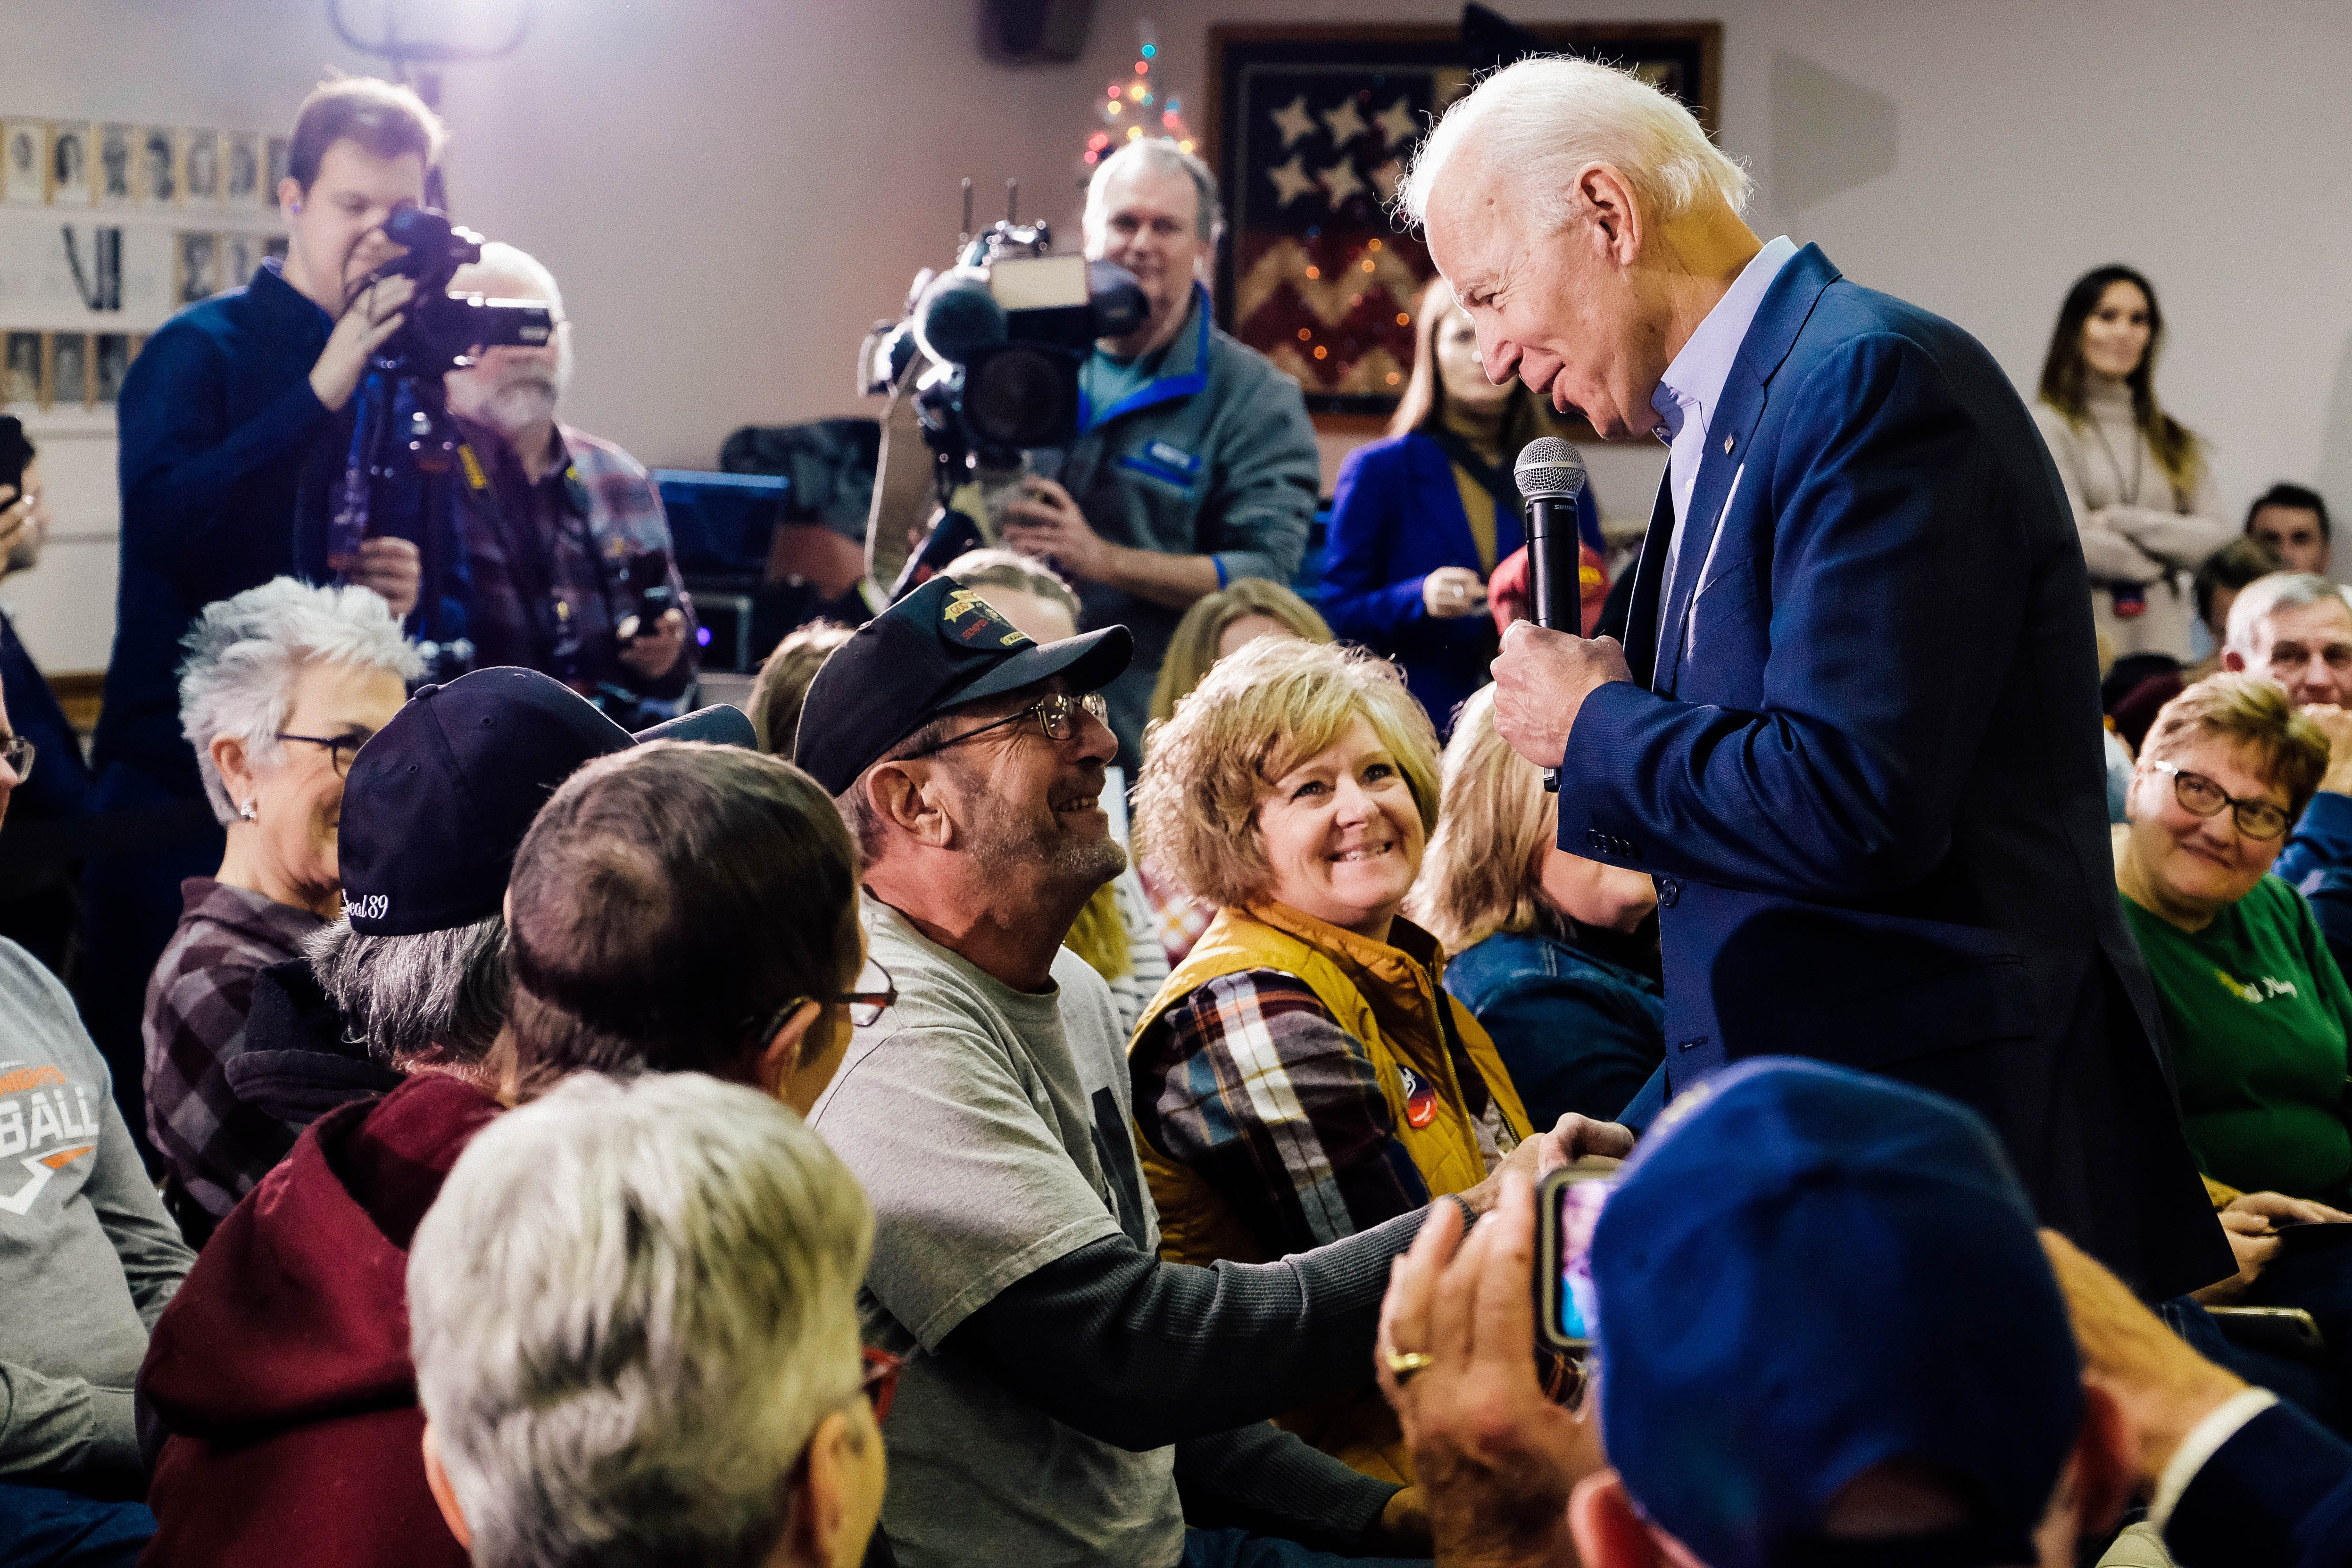 Biden, standing, shakes the hand of a man seated in the audience of a town hall–style event.